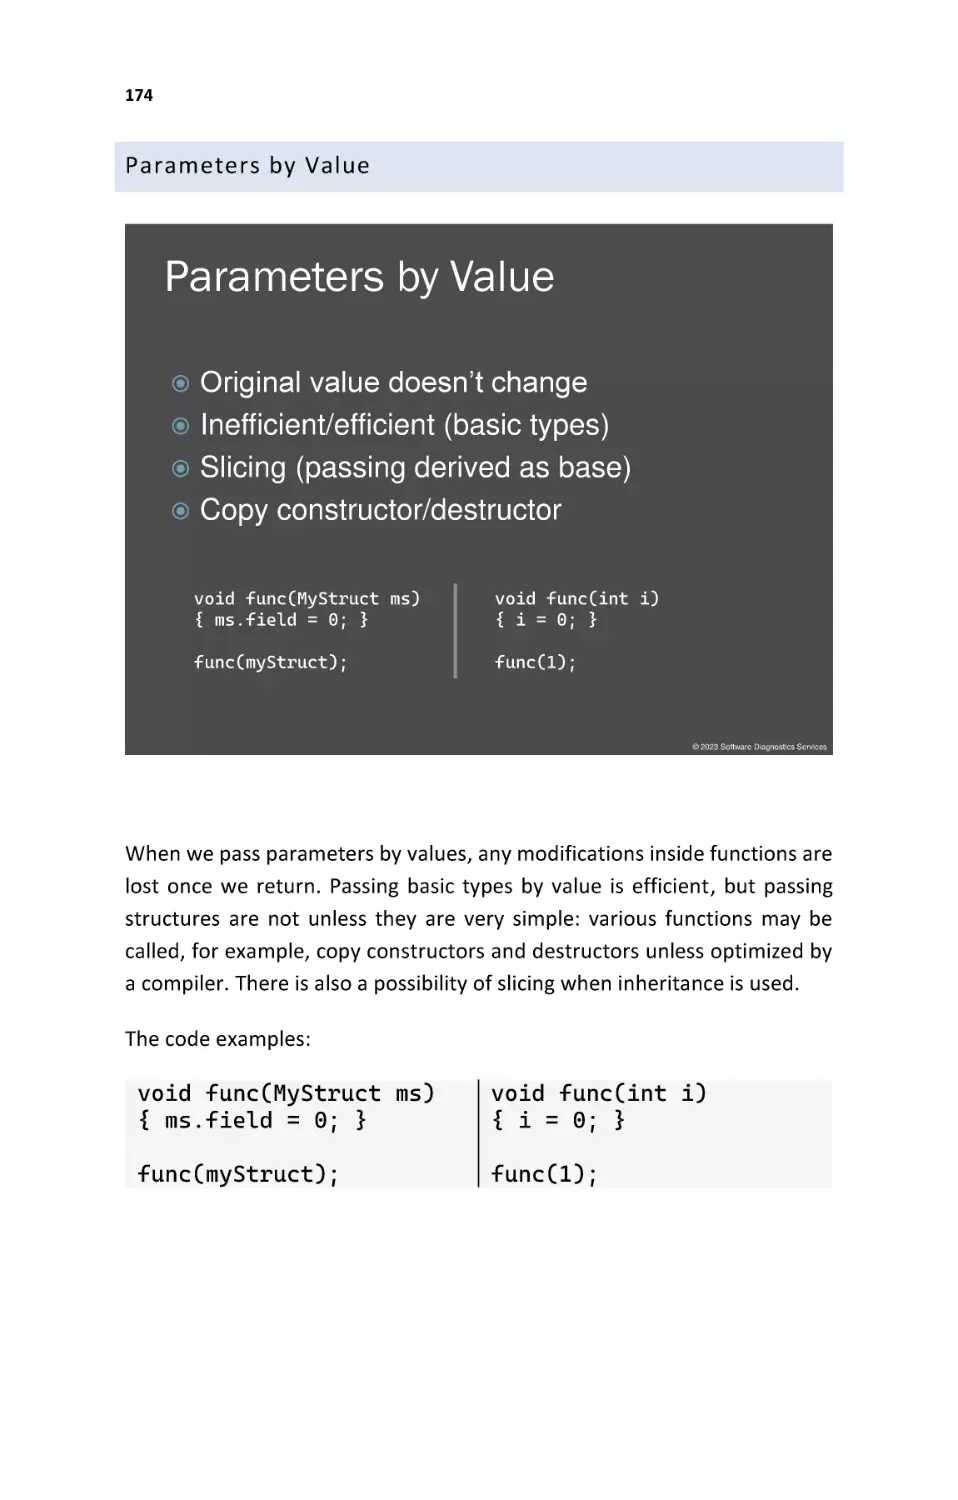 Parameters by Value